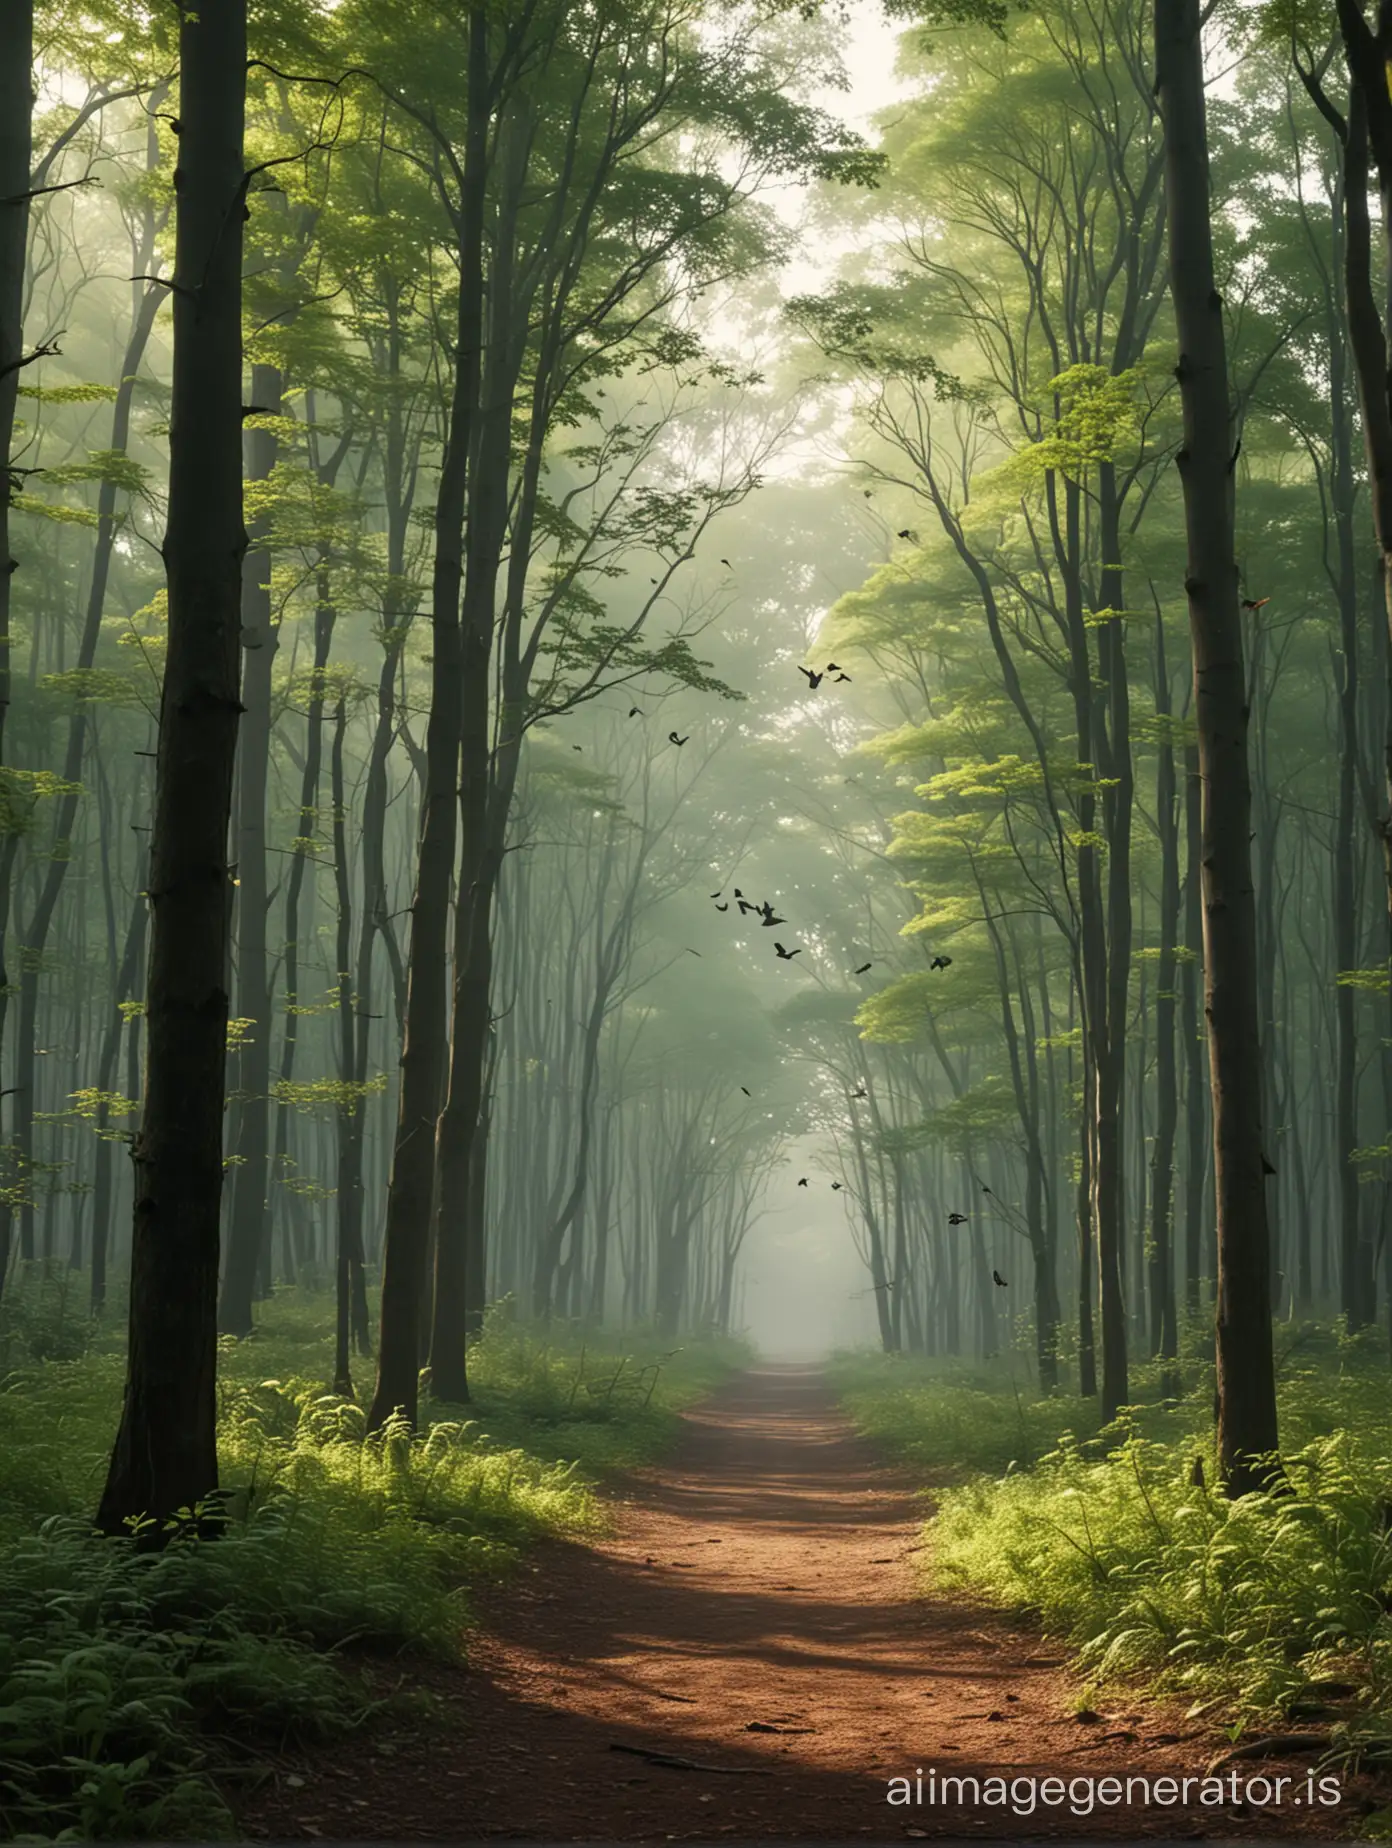 Opening shot of a serene forest with birds chirping